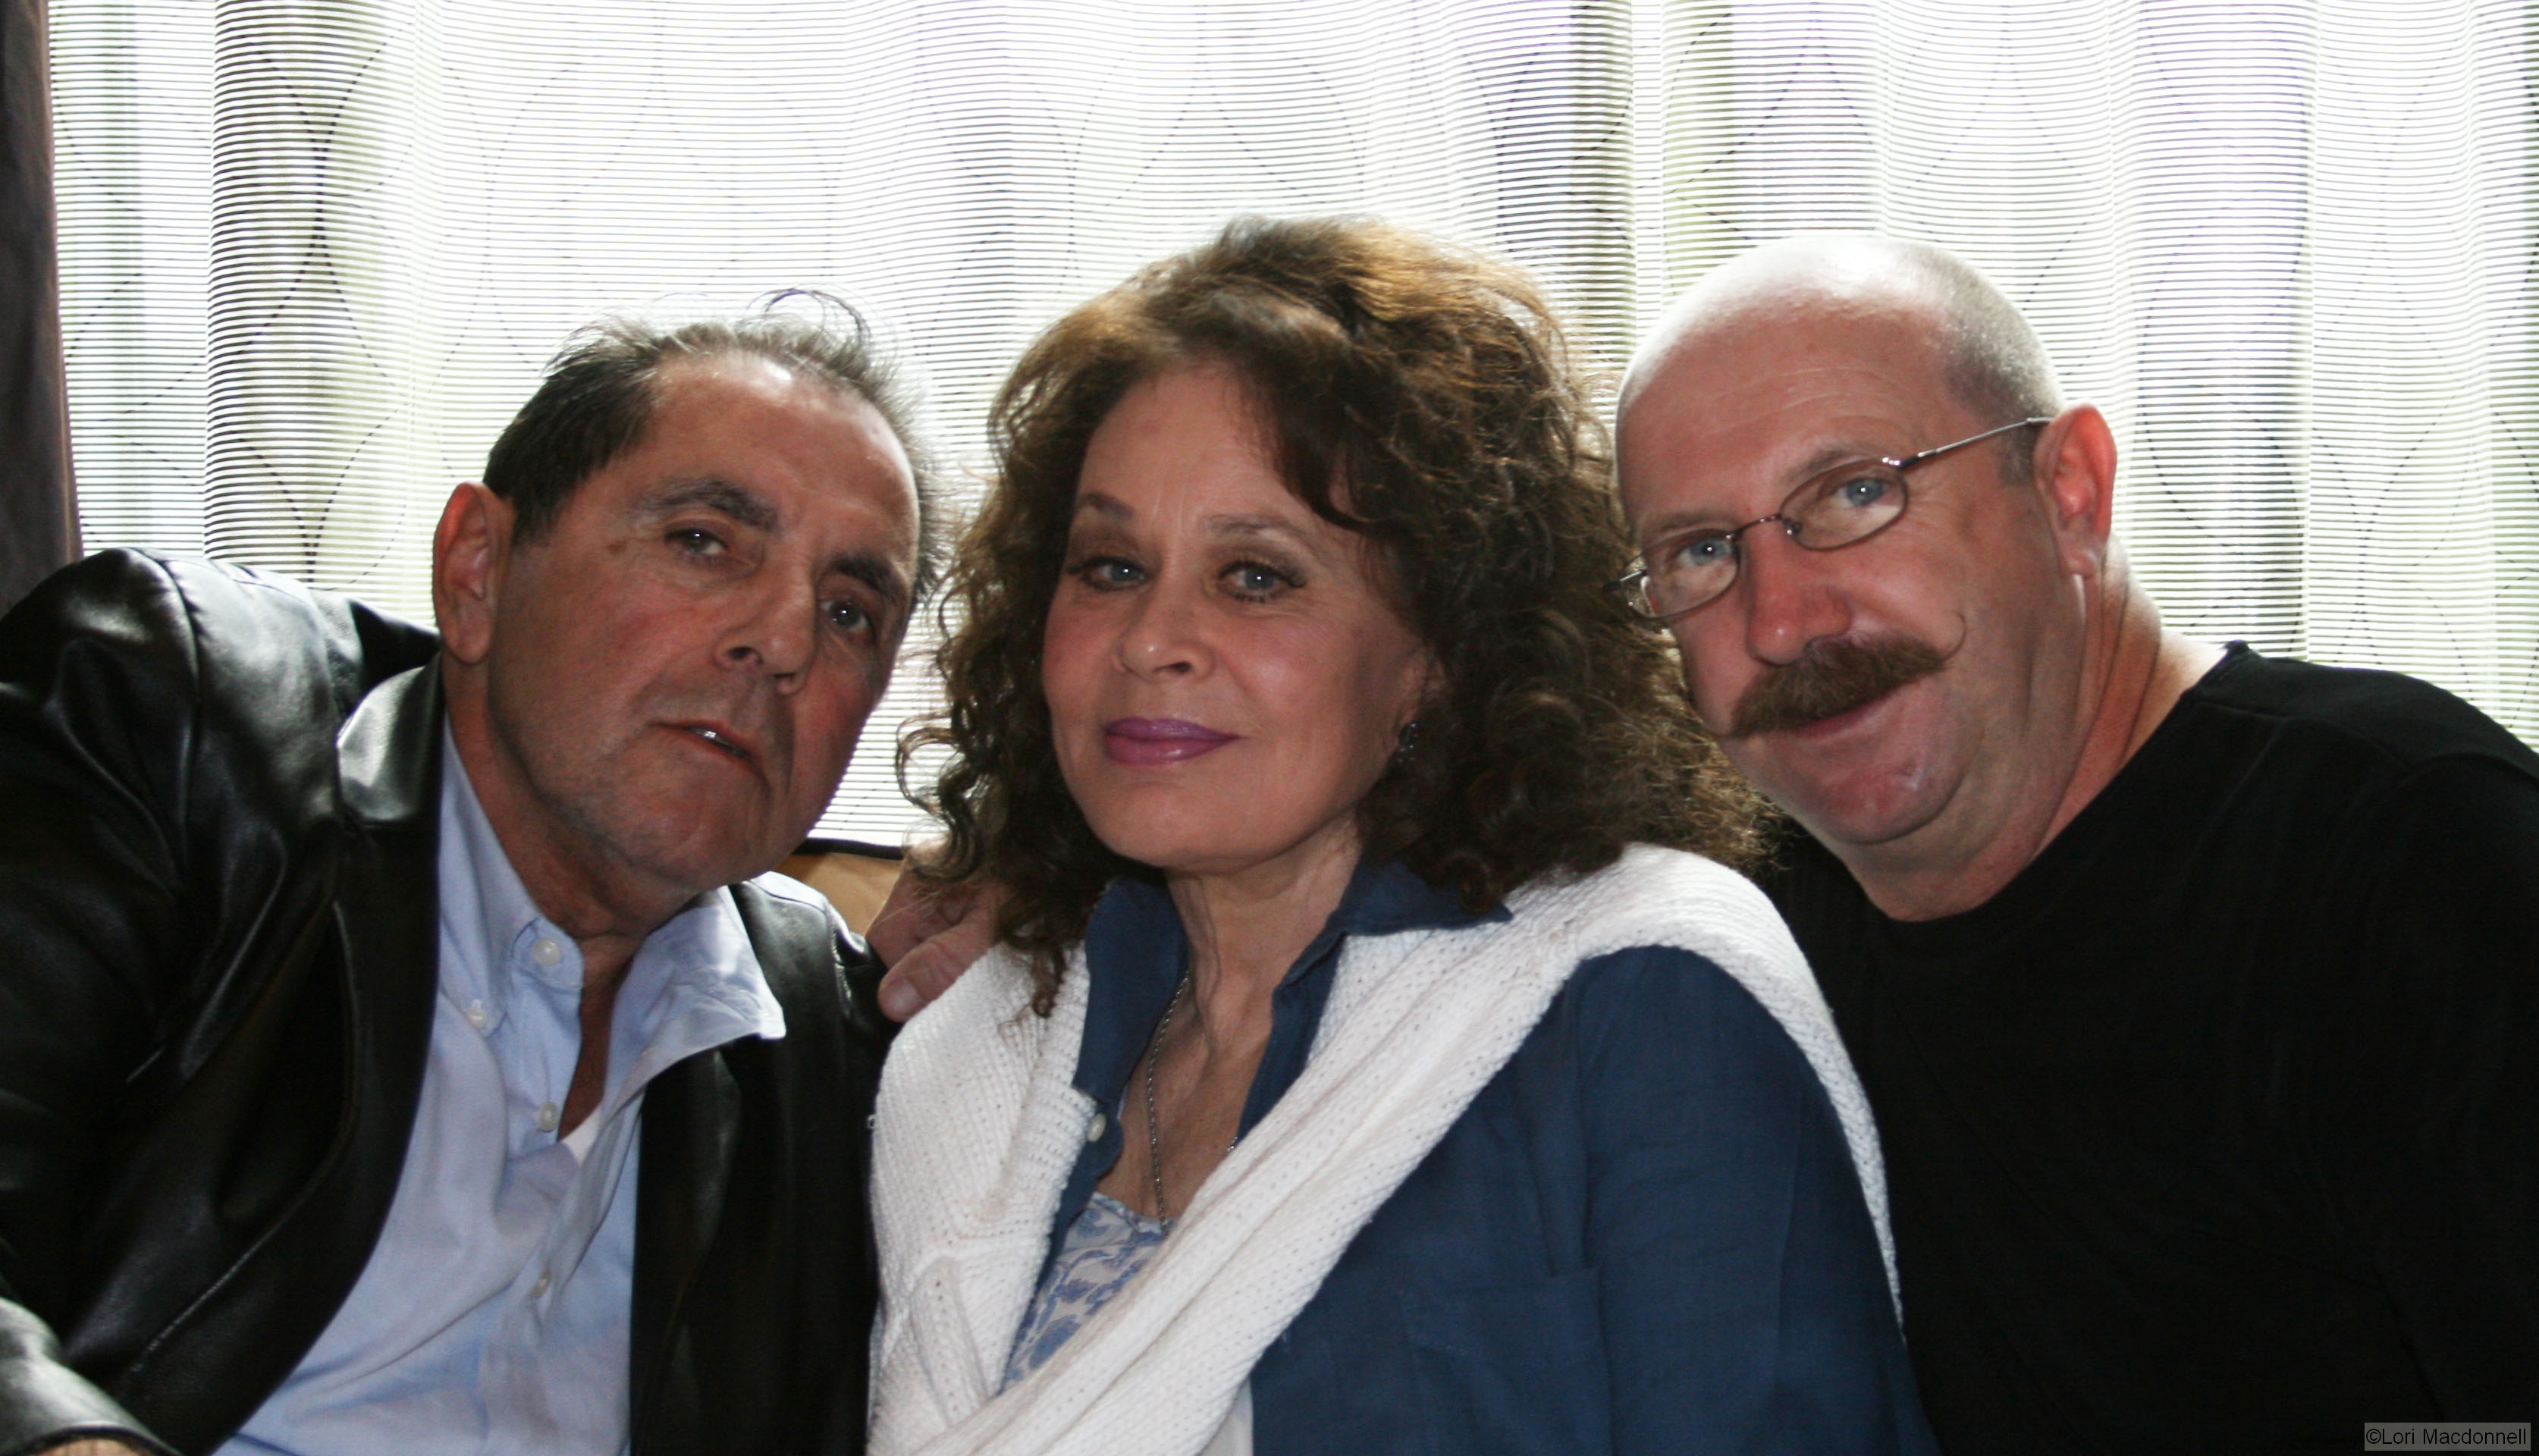 NIFF 2008 Karen Black , David Proval and Edmond G Coisson at the Arista Hotel